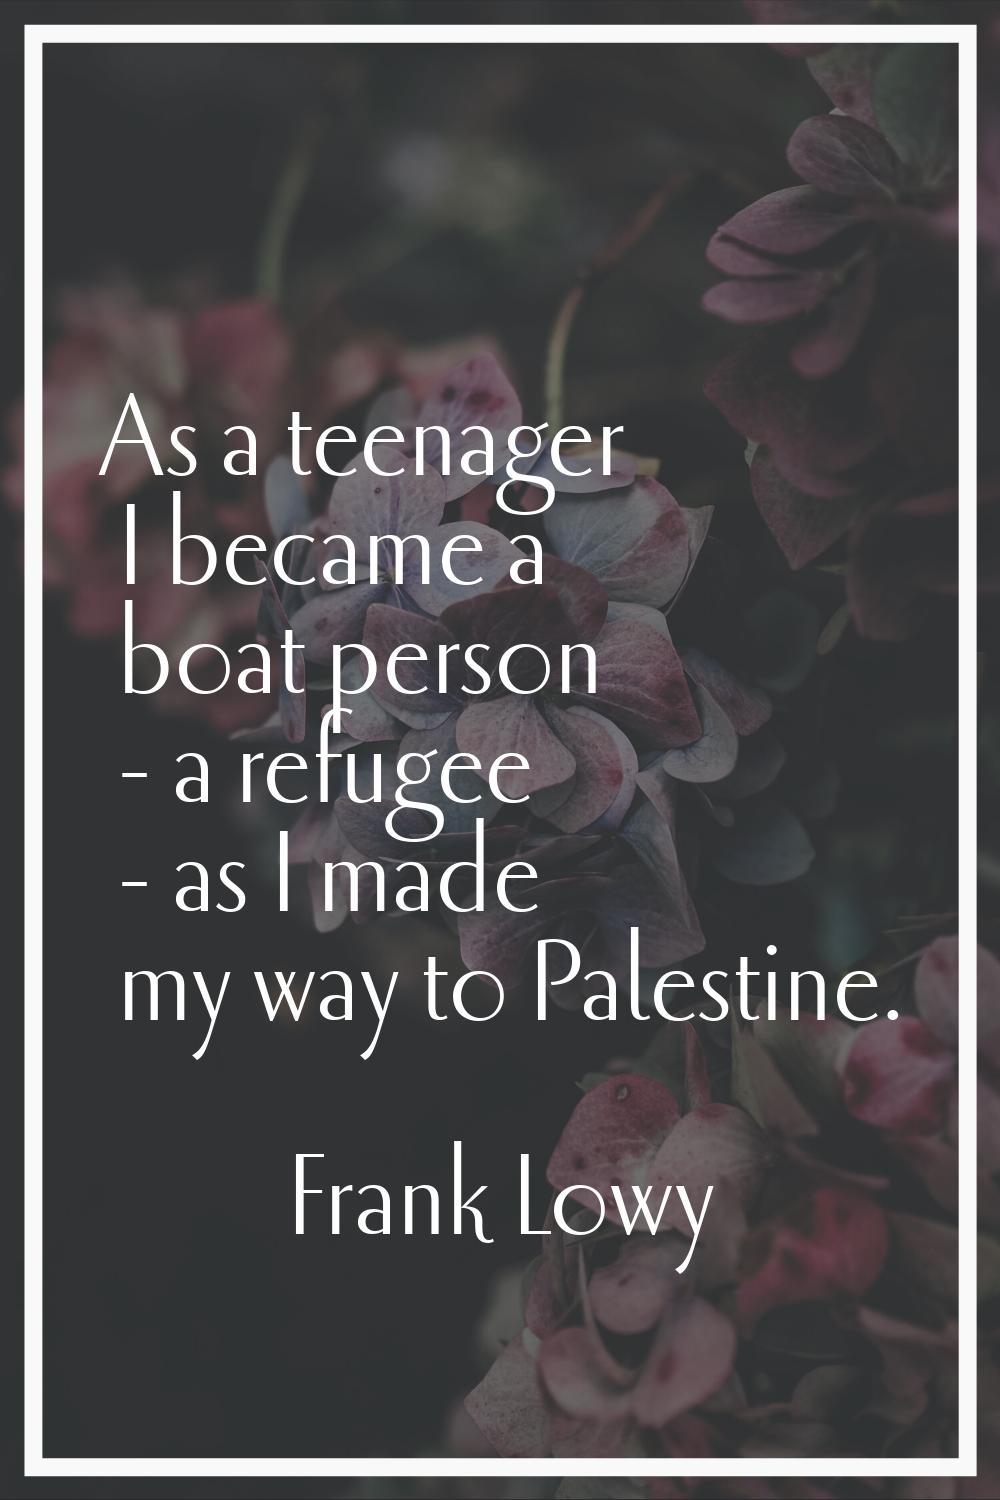 As a teenager I became a boat person - a refugee - as I made my way to Palestine.